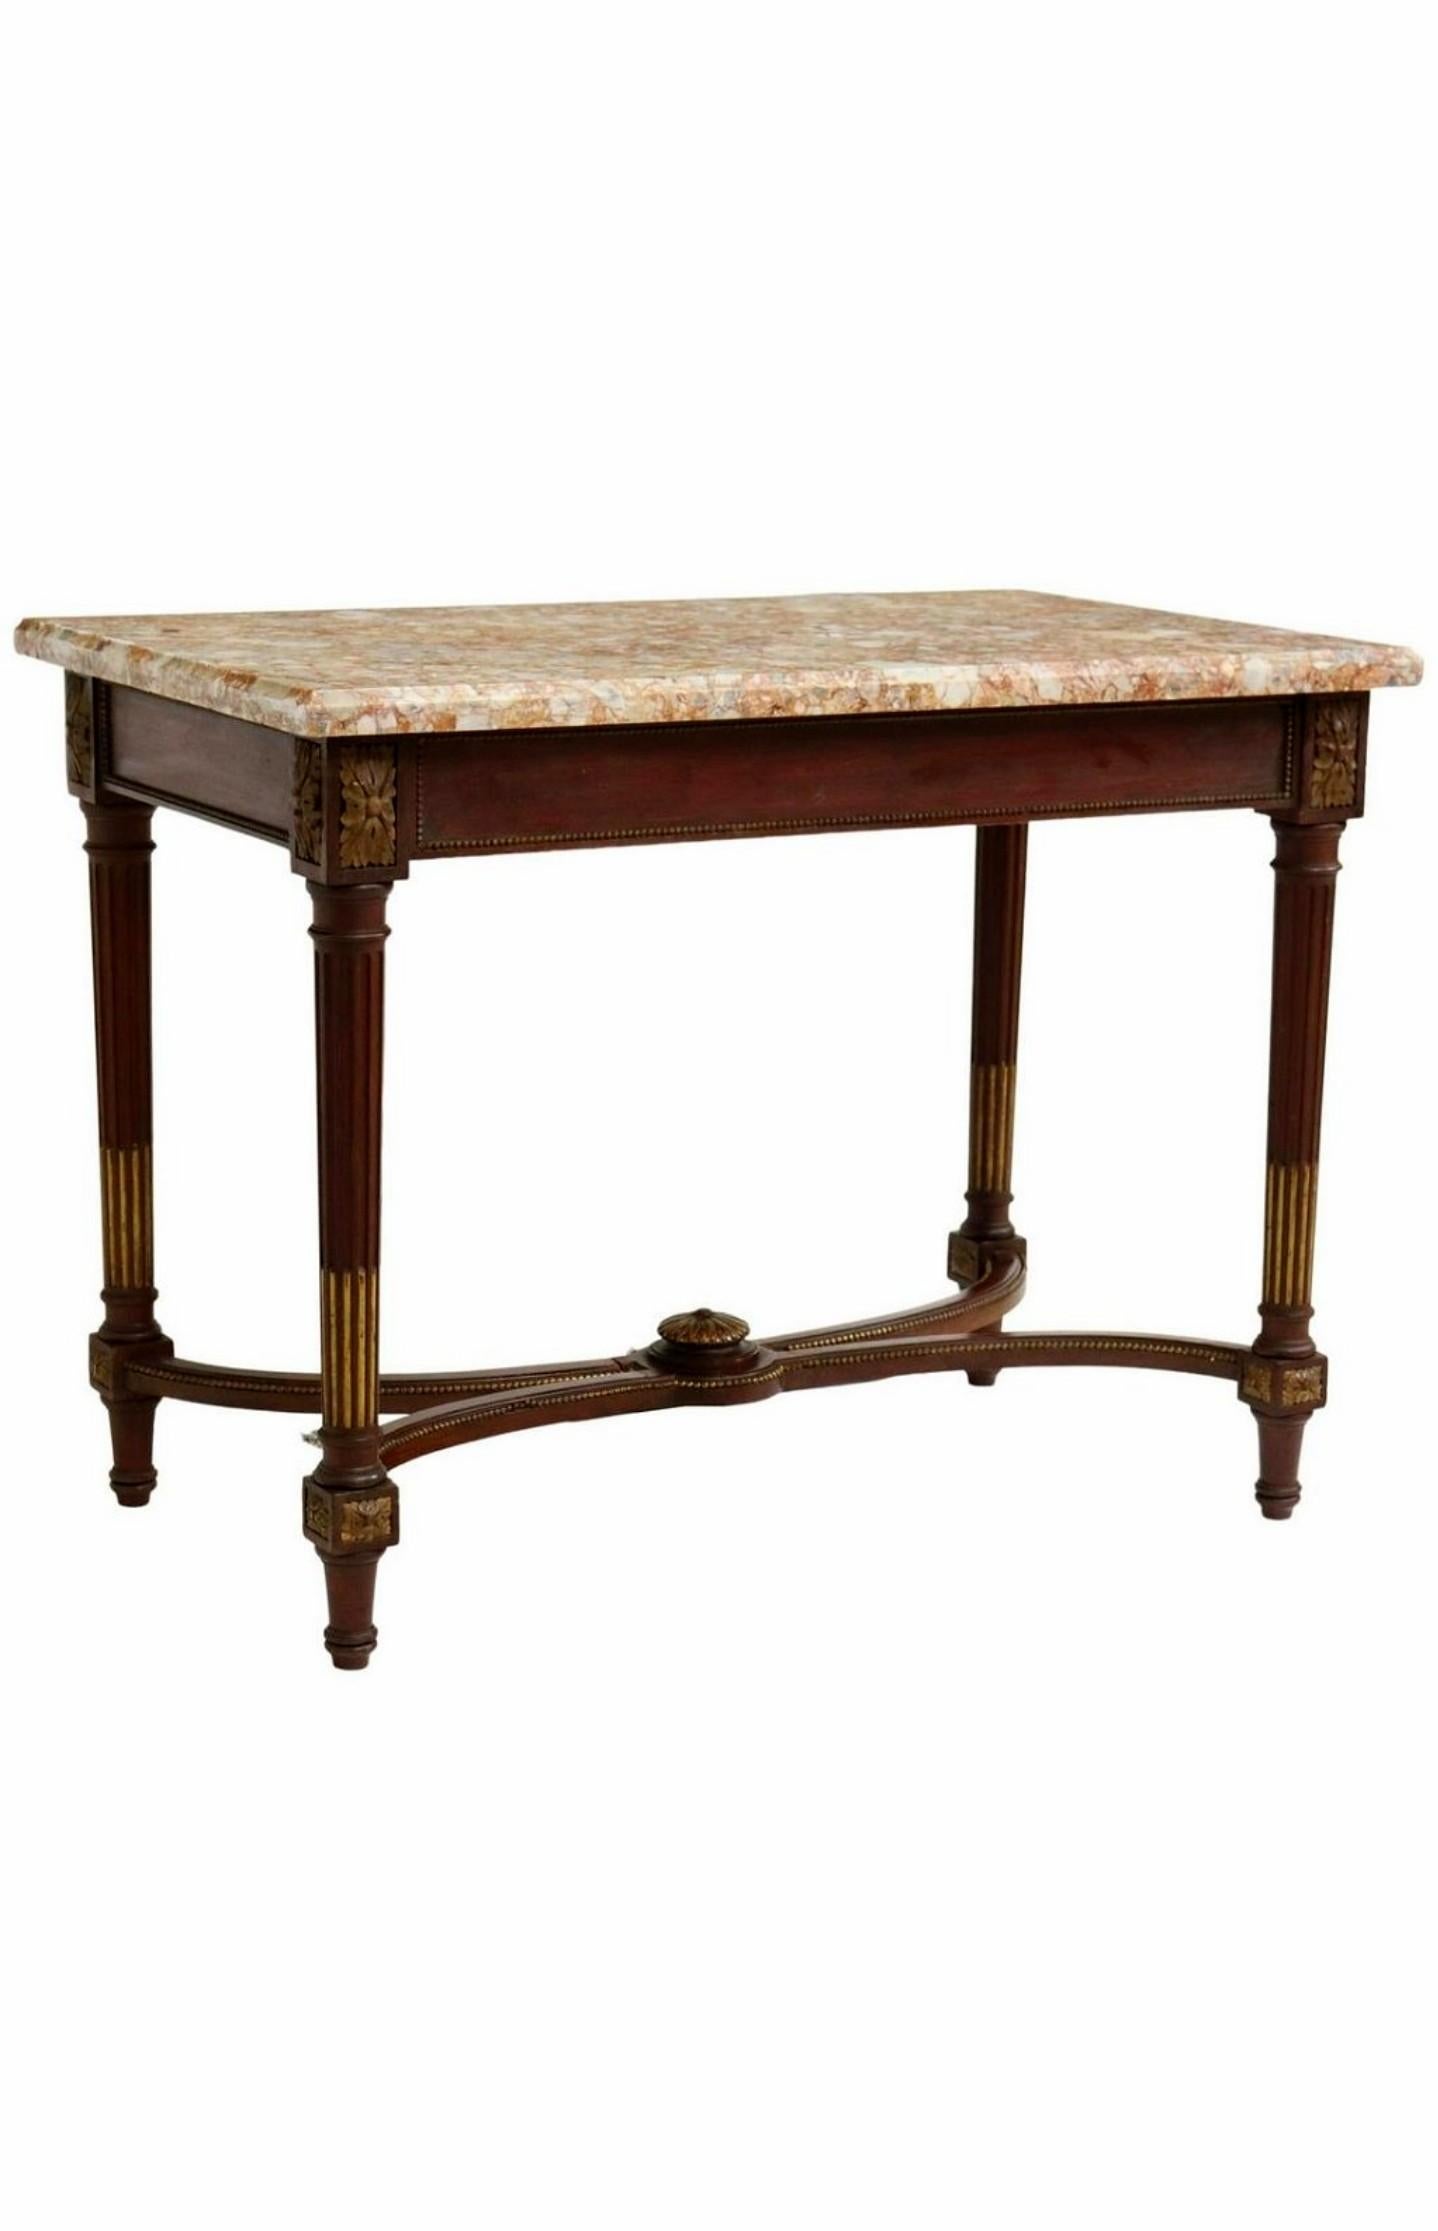 Antique French Louis XVI Style Mahogany Marble-Top Center Table In Good Condition For Sale In Forney, TX